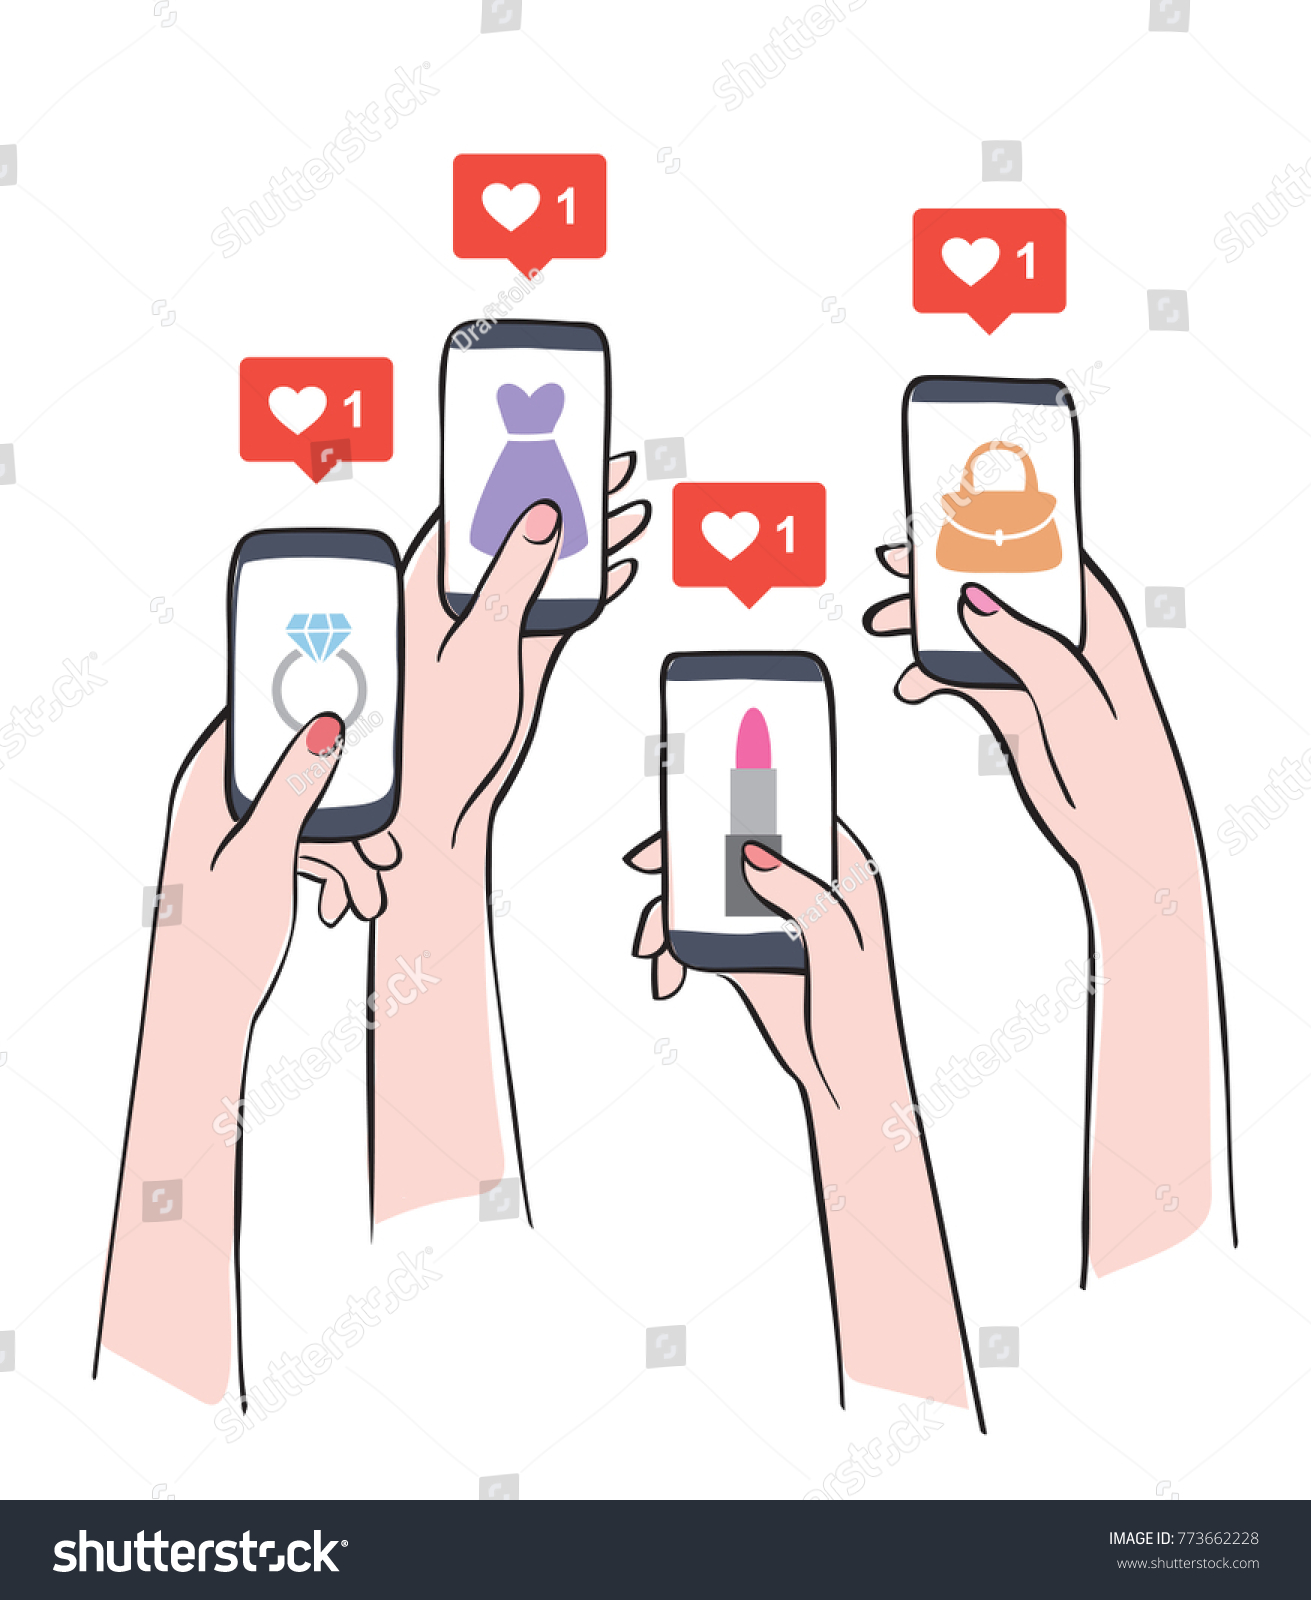 Social media marketing reaching potential customers. female hands holding smartphones with shop items on the screen.
 #773662228